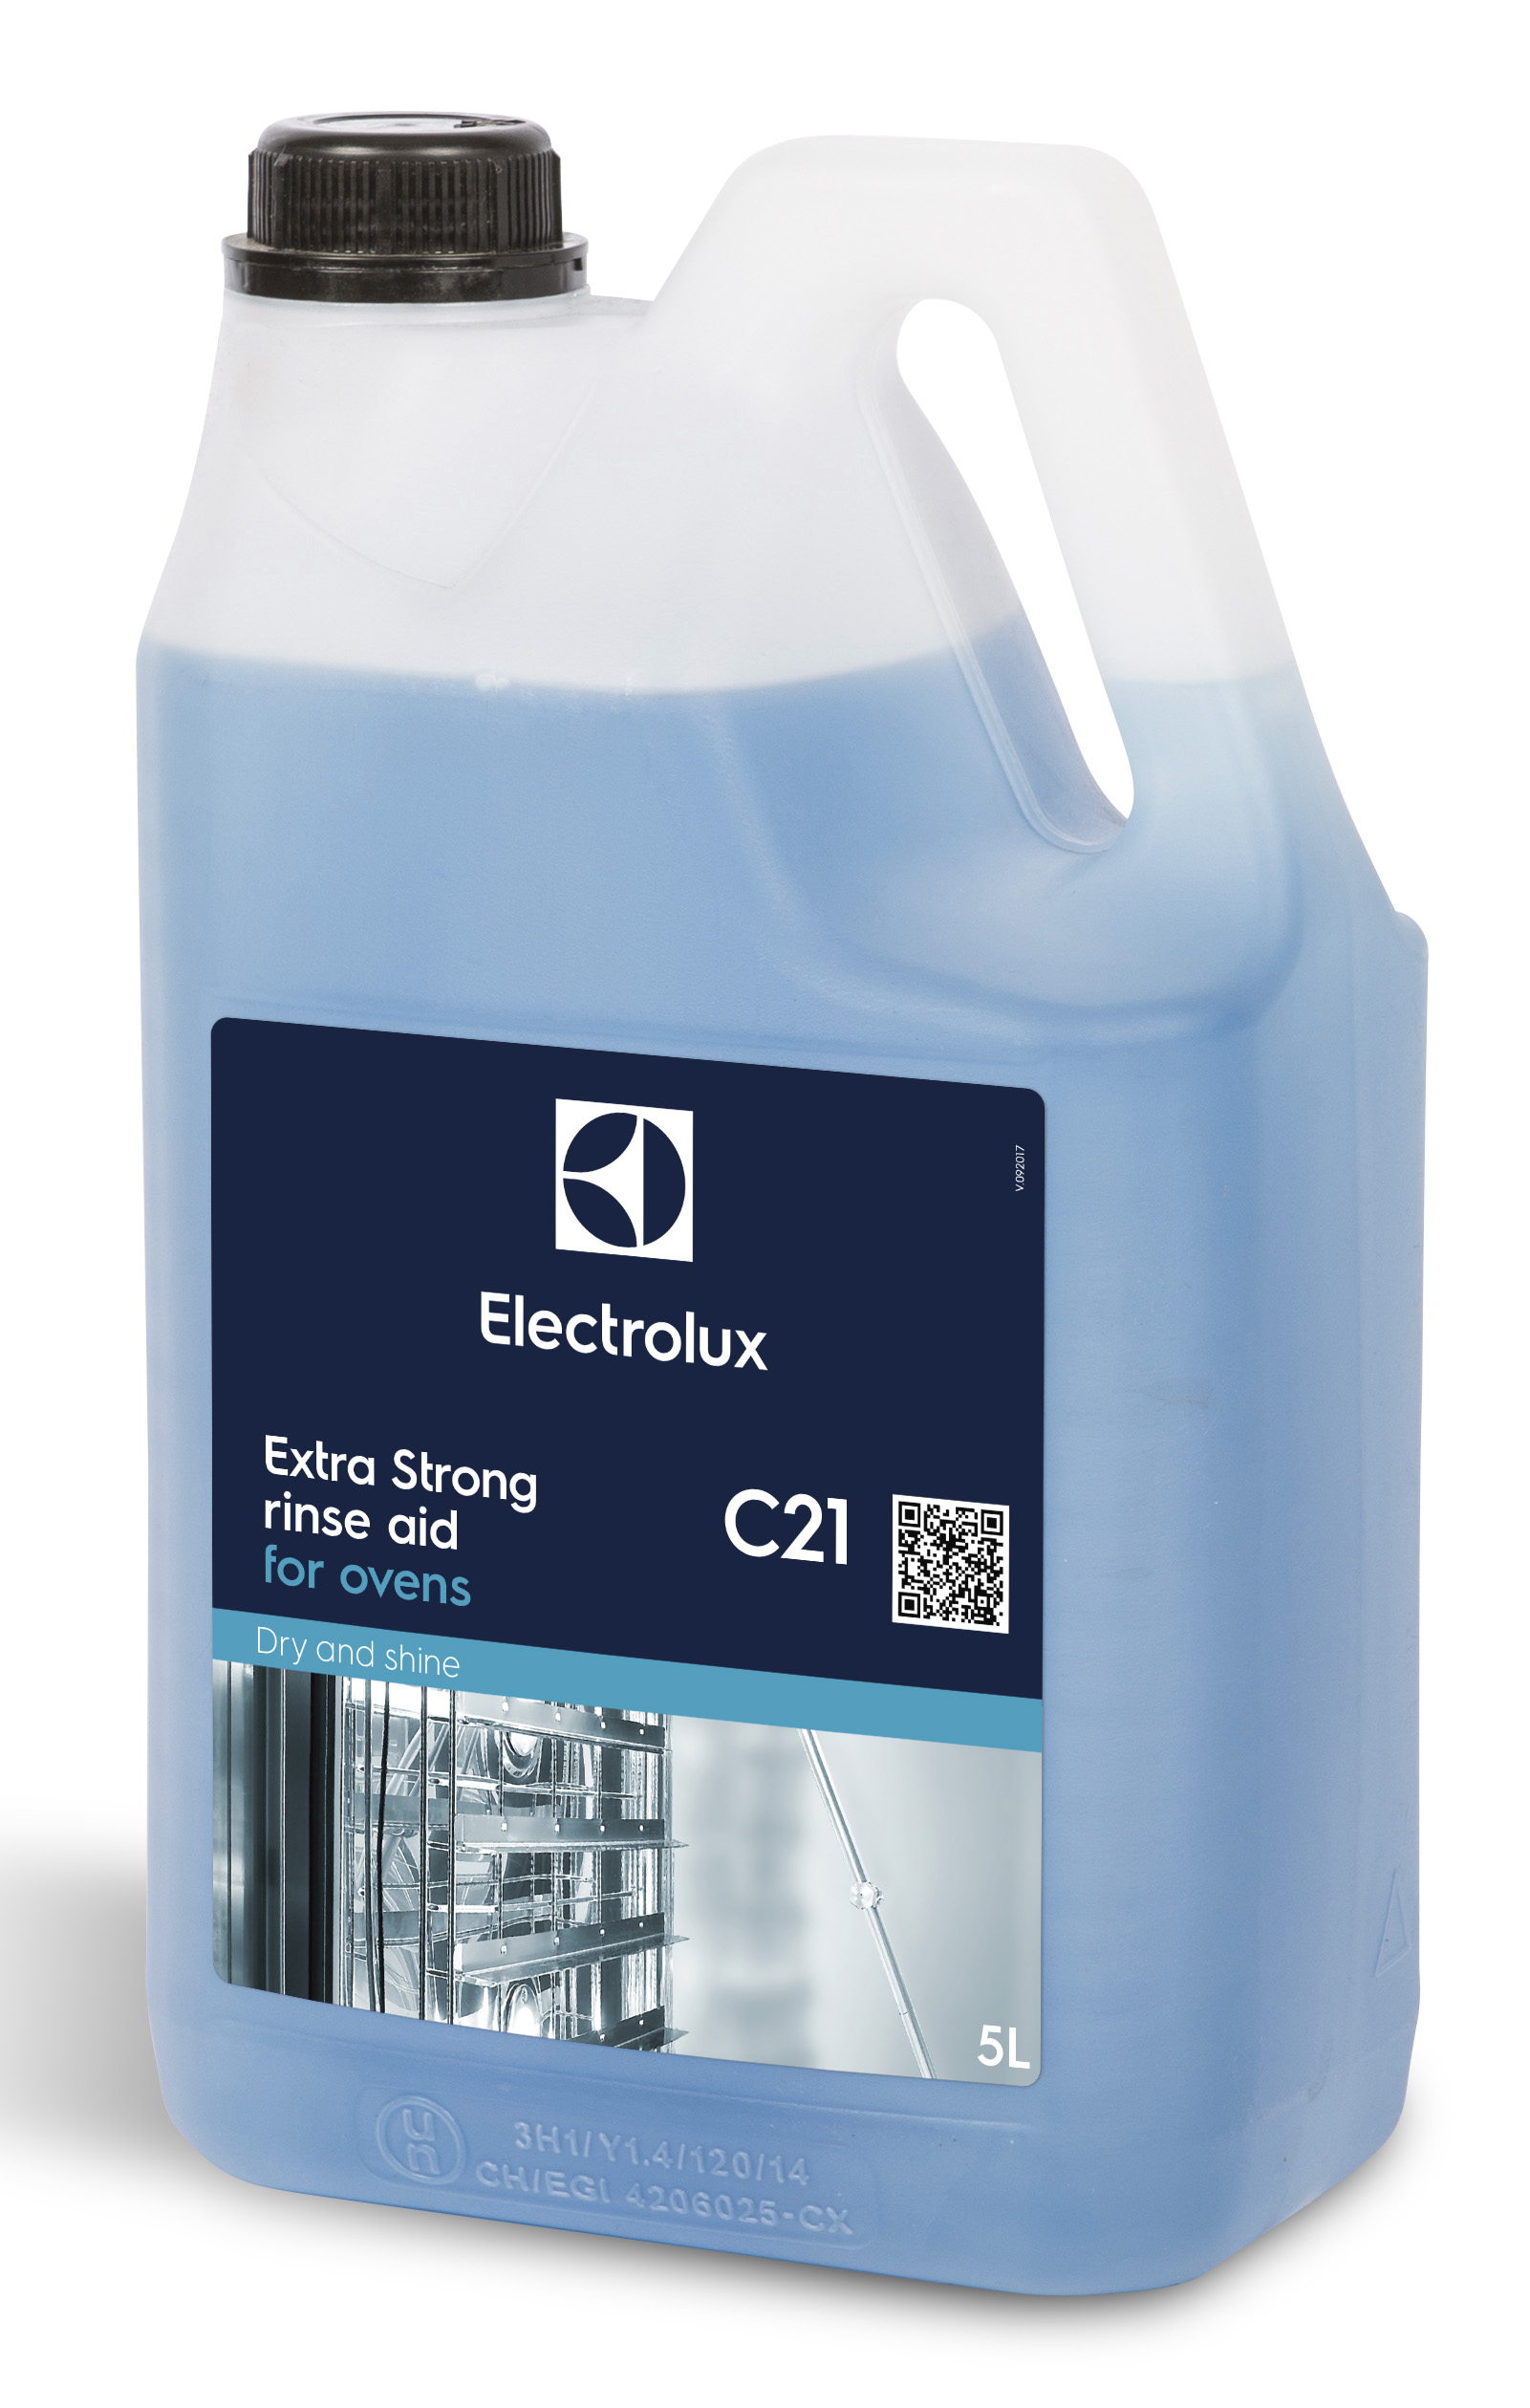 C21 EXTRA STRONG RINSE AID (5l)